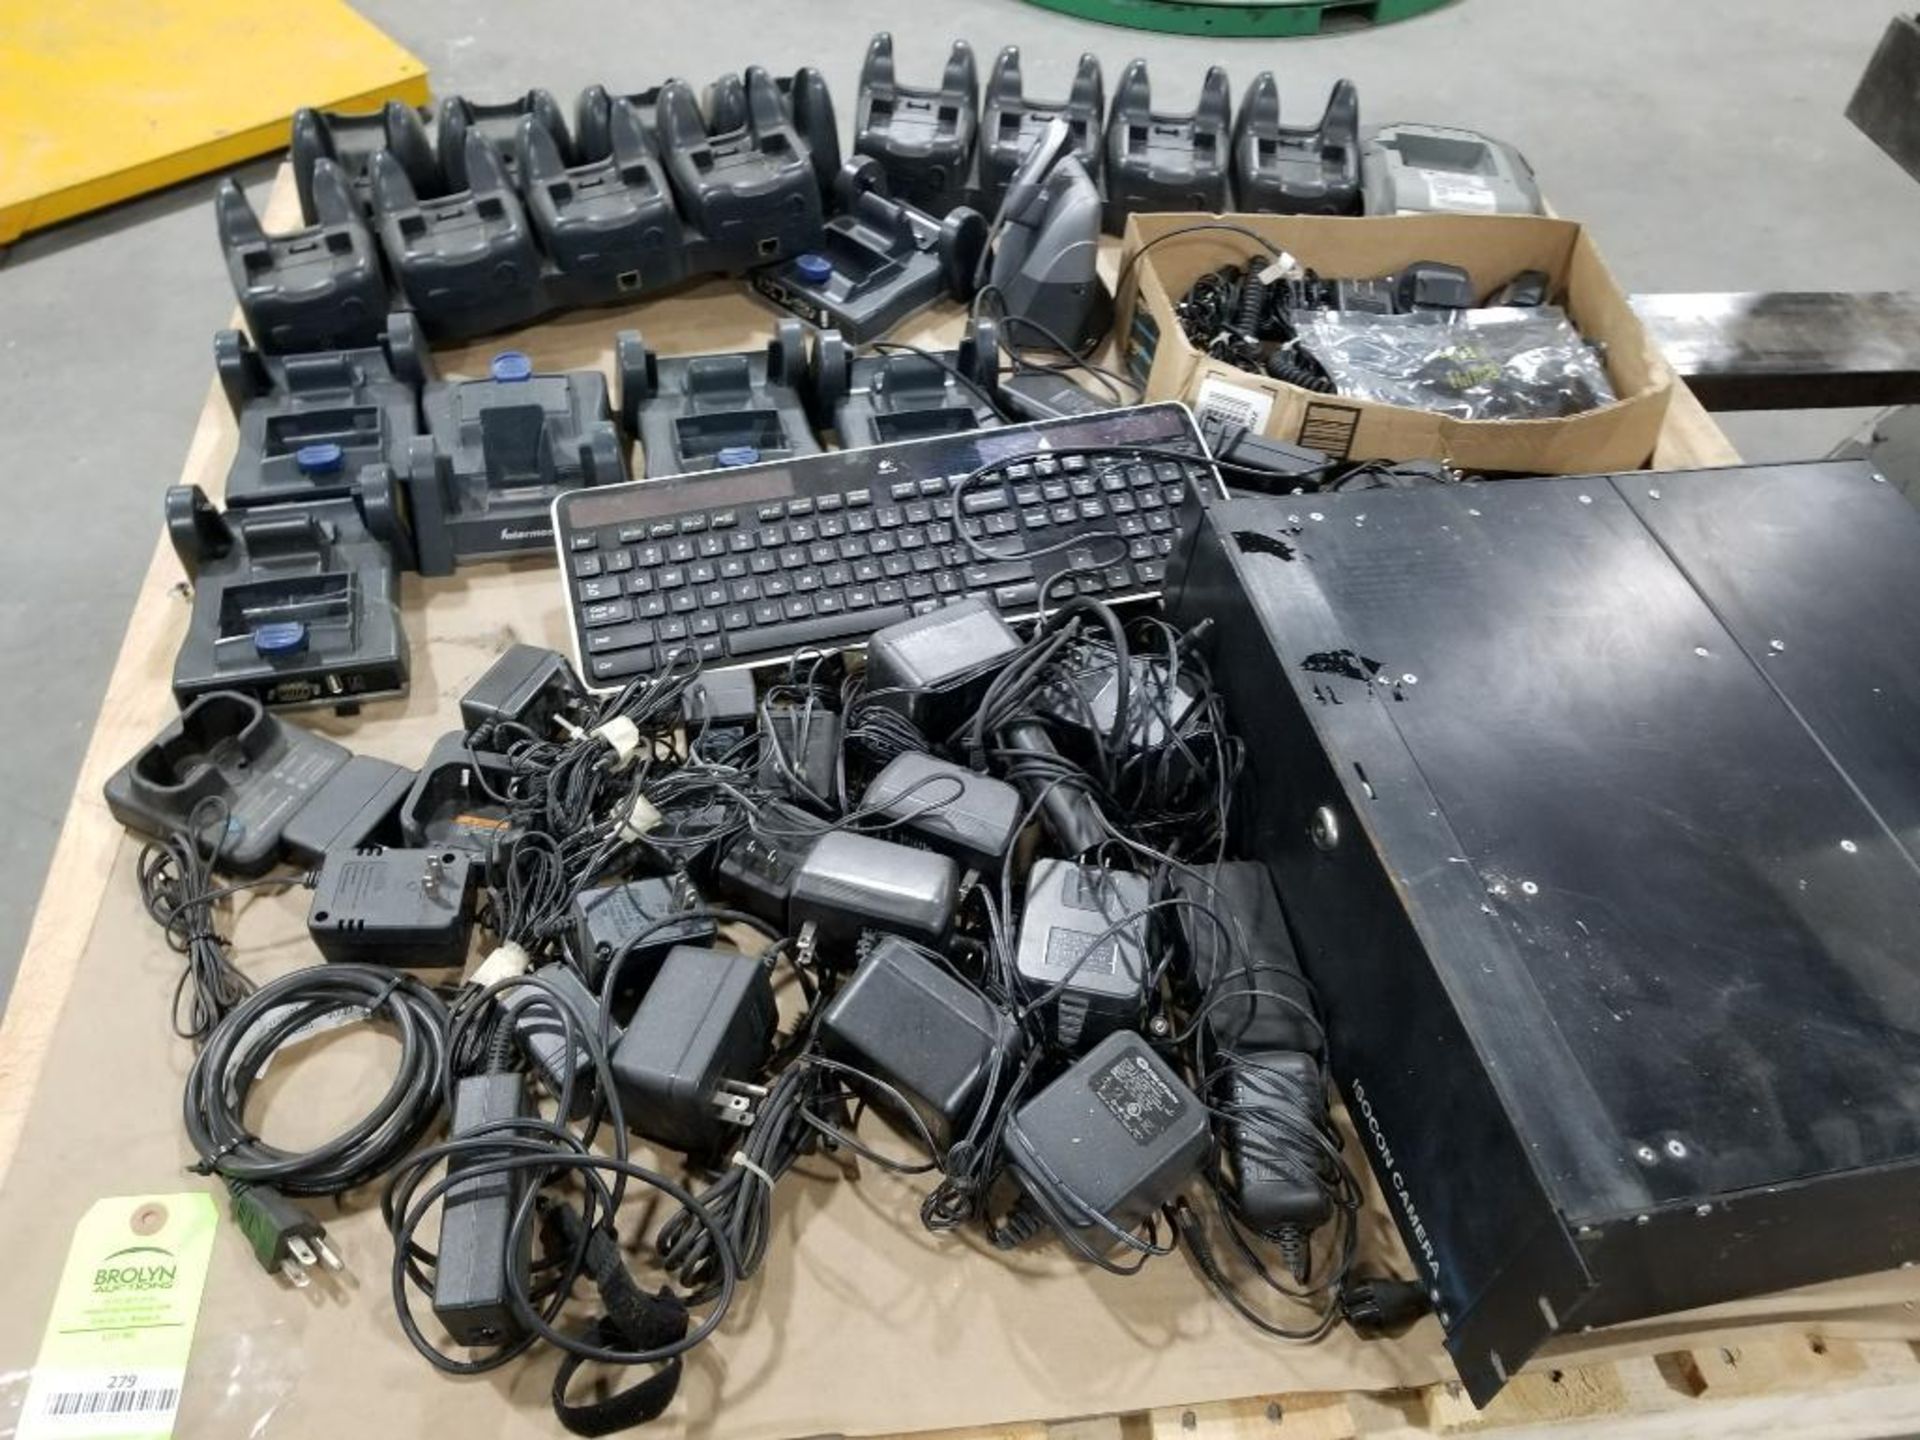 Pallet of assorted walkie talkie chargers, computer components, etc.